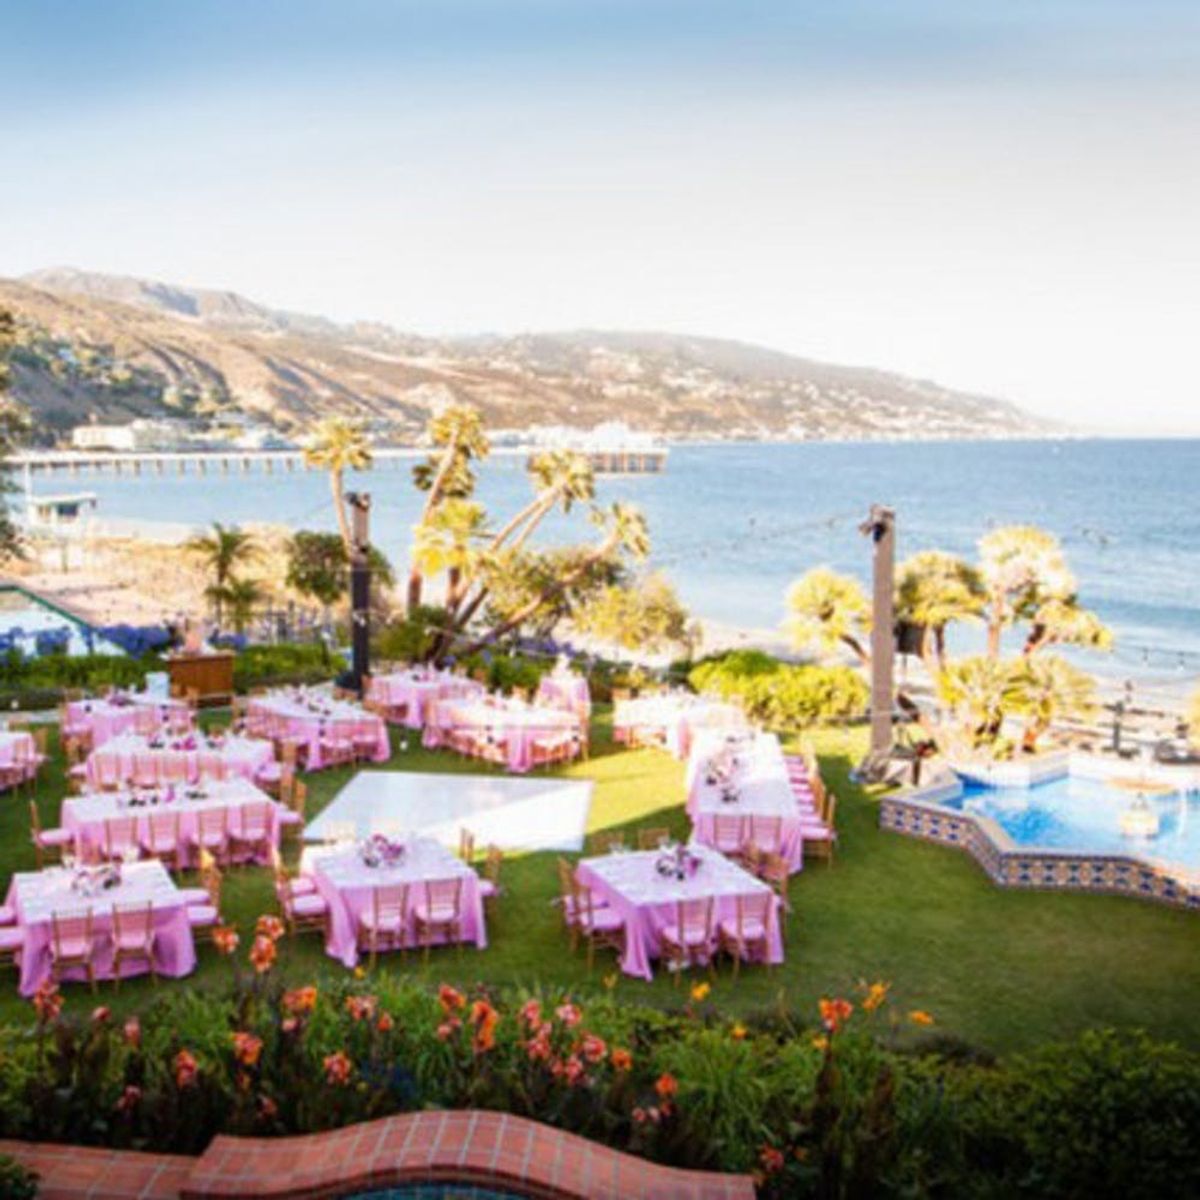 Dream Wedding Venues You Can Get for… $10,000